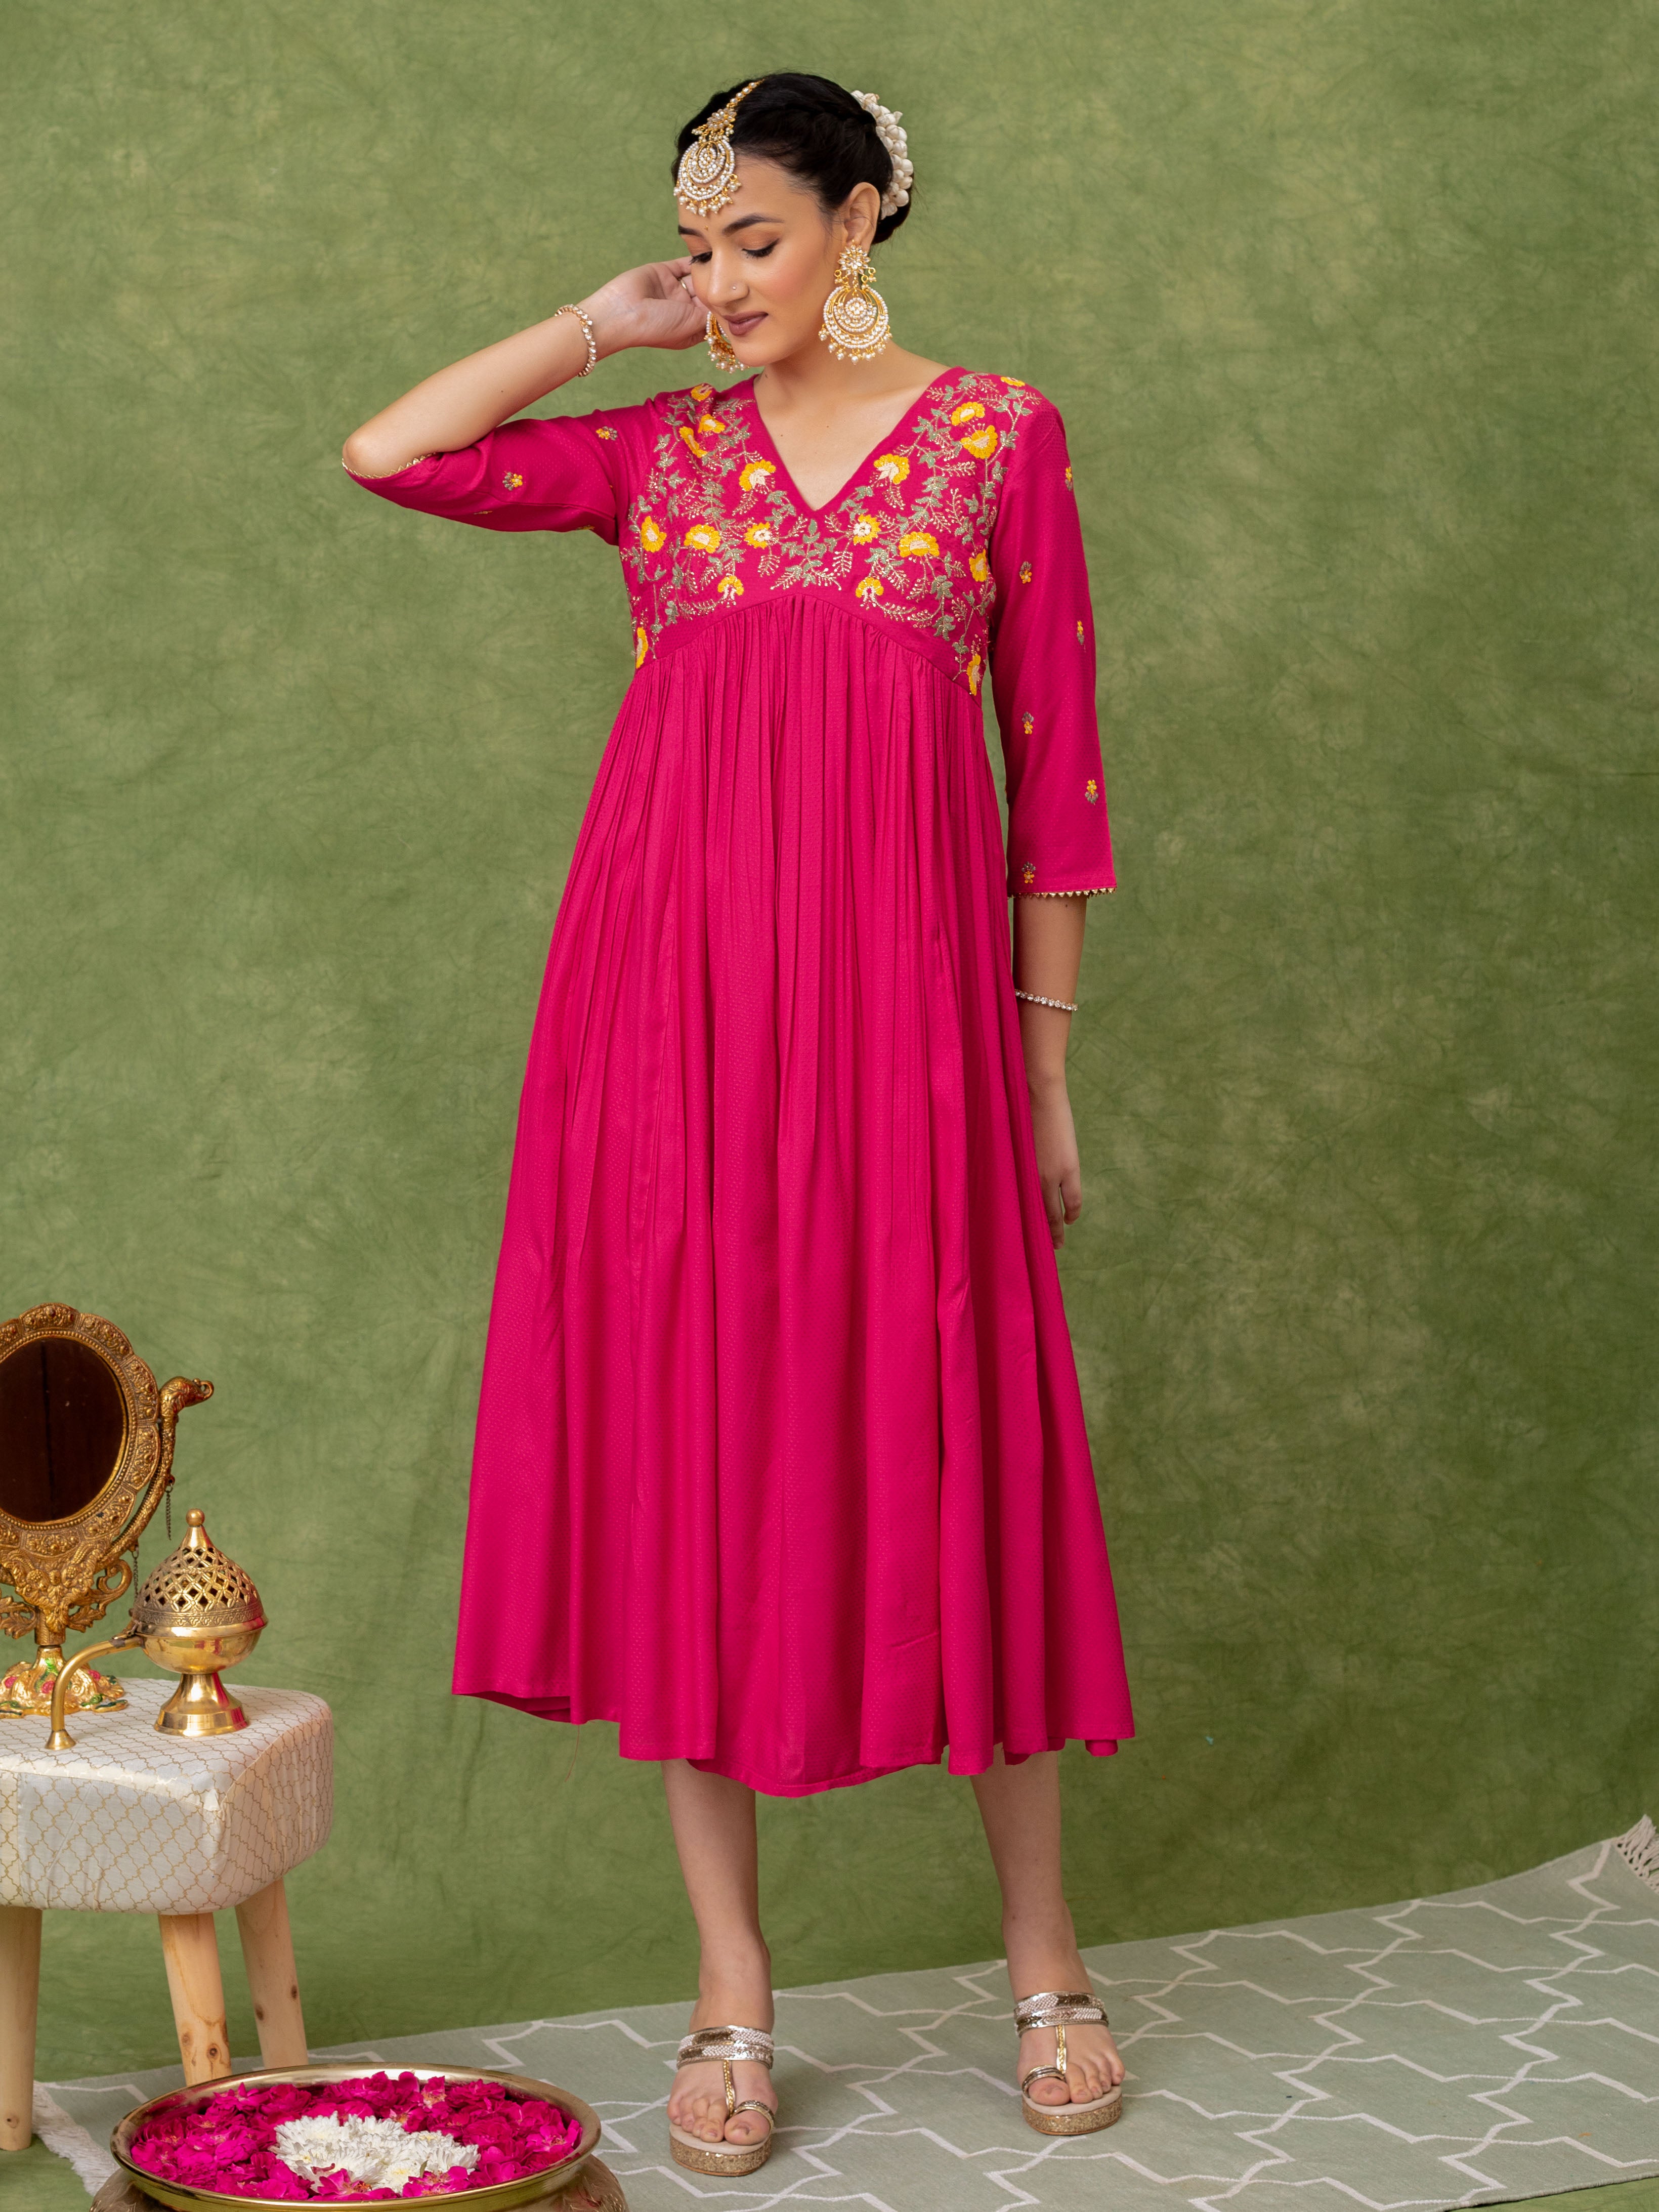 this-floral-embroidered-v-neck-pink-a-line-dress-is-a-stunning-addition-to-your-wardrobe-this-dress-features-multicolor-embroidery-creating-a-unique-look-that-will-stand-out-in-any-setting